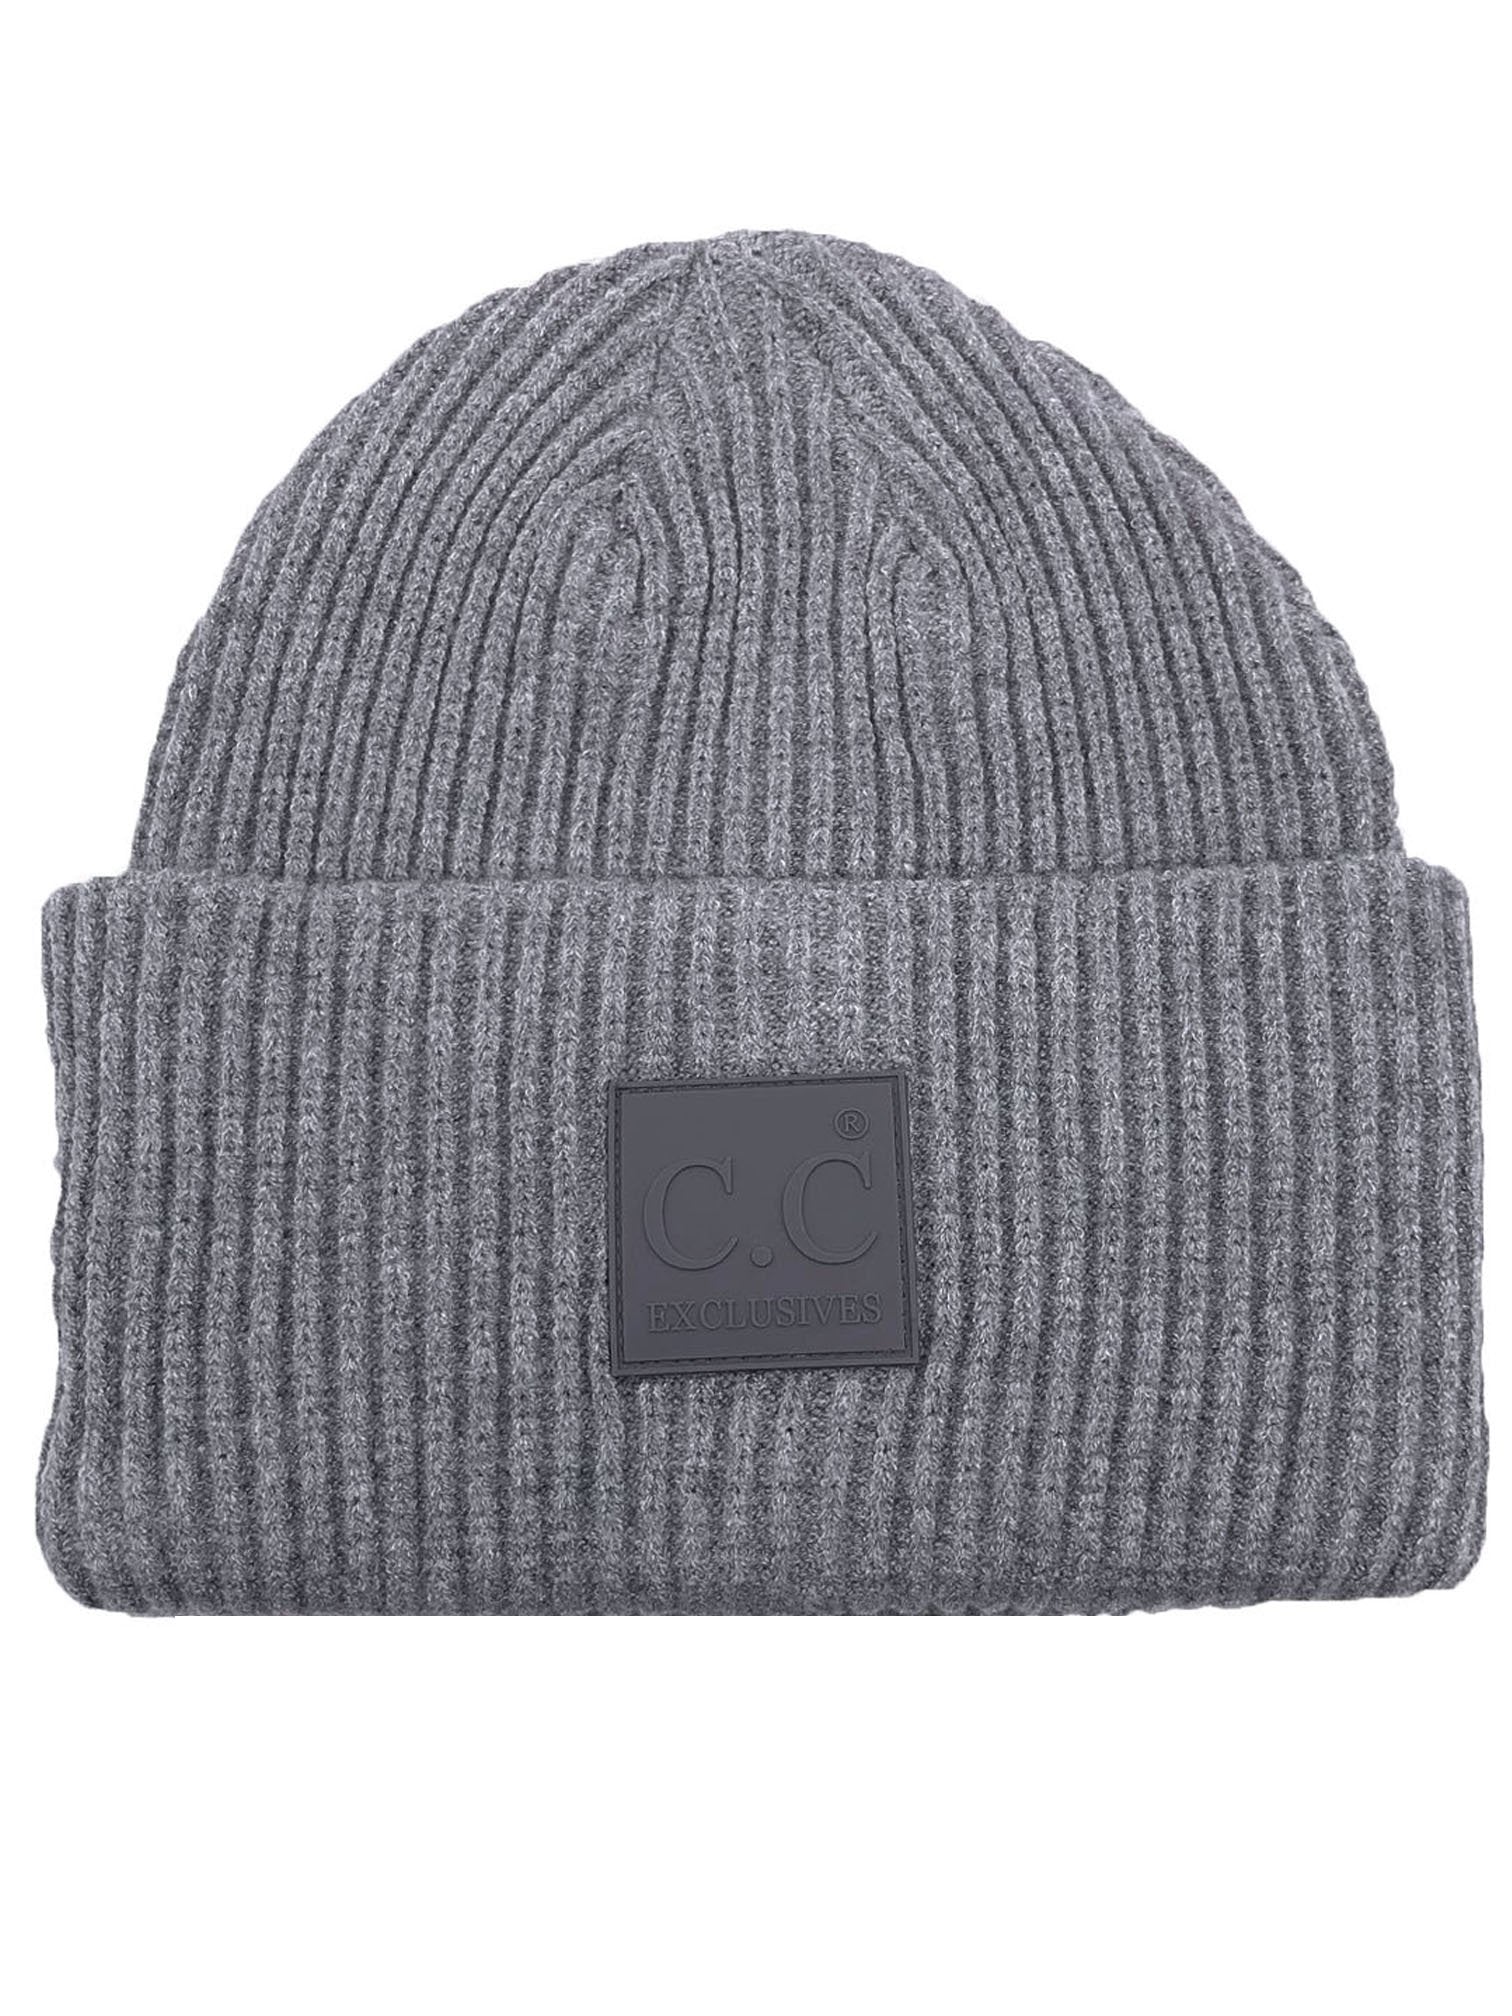 HAT-7007 Beanie with Rubber Patch Lt Melange Grey